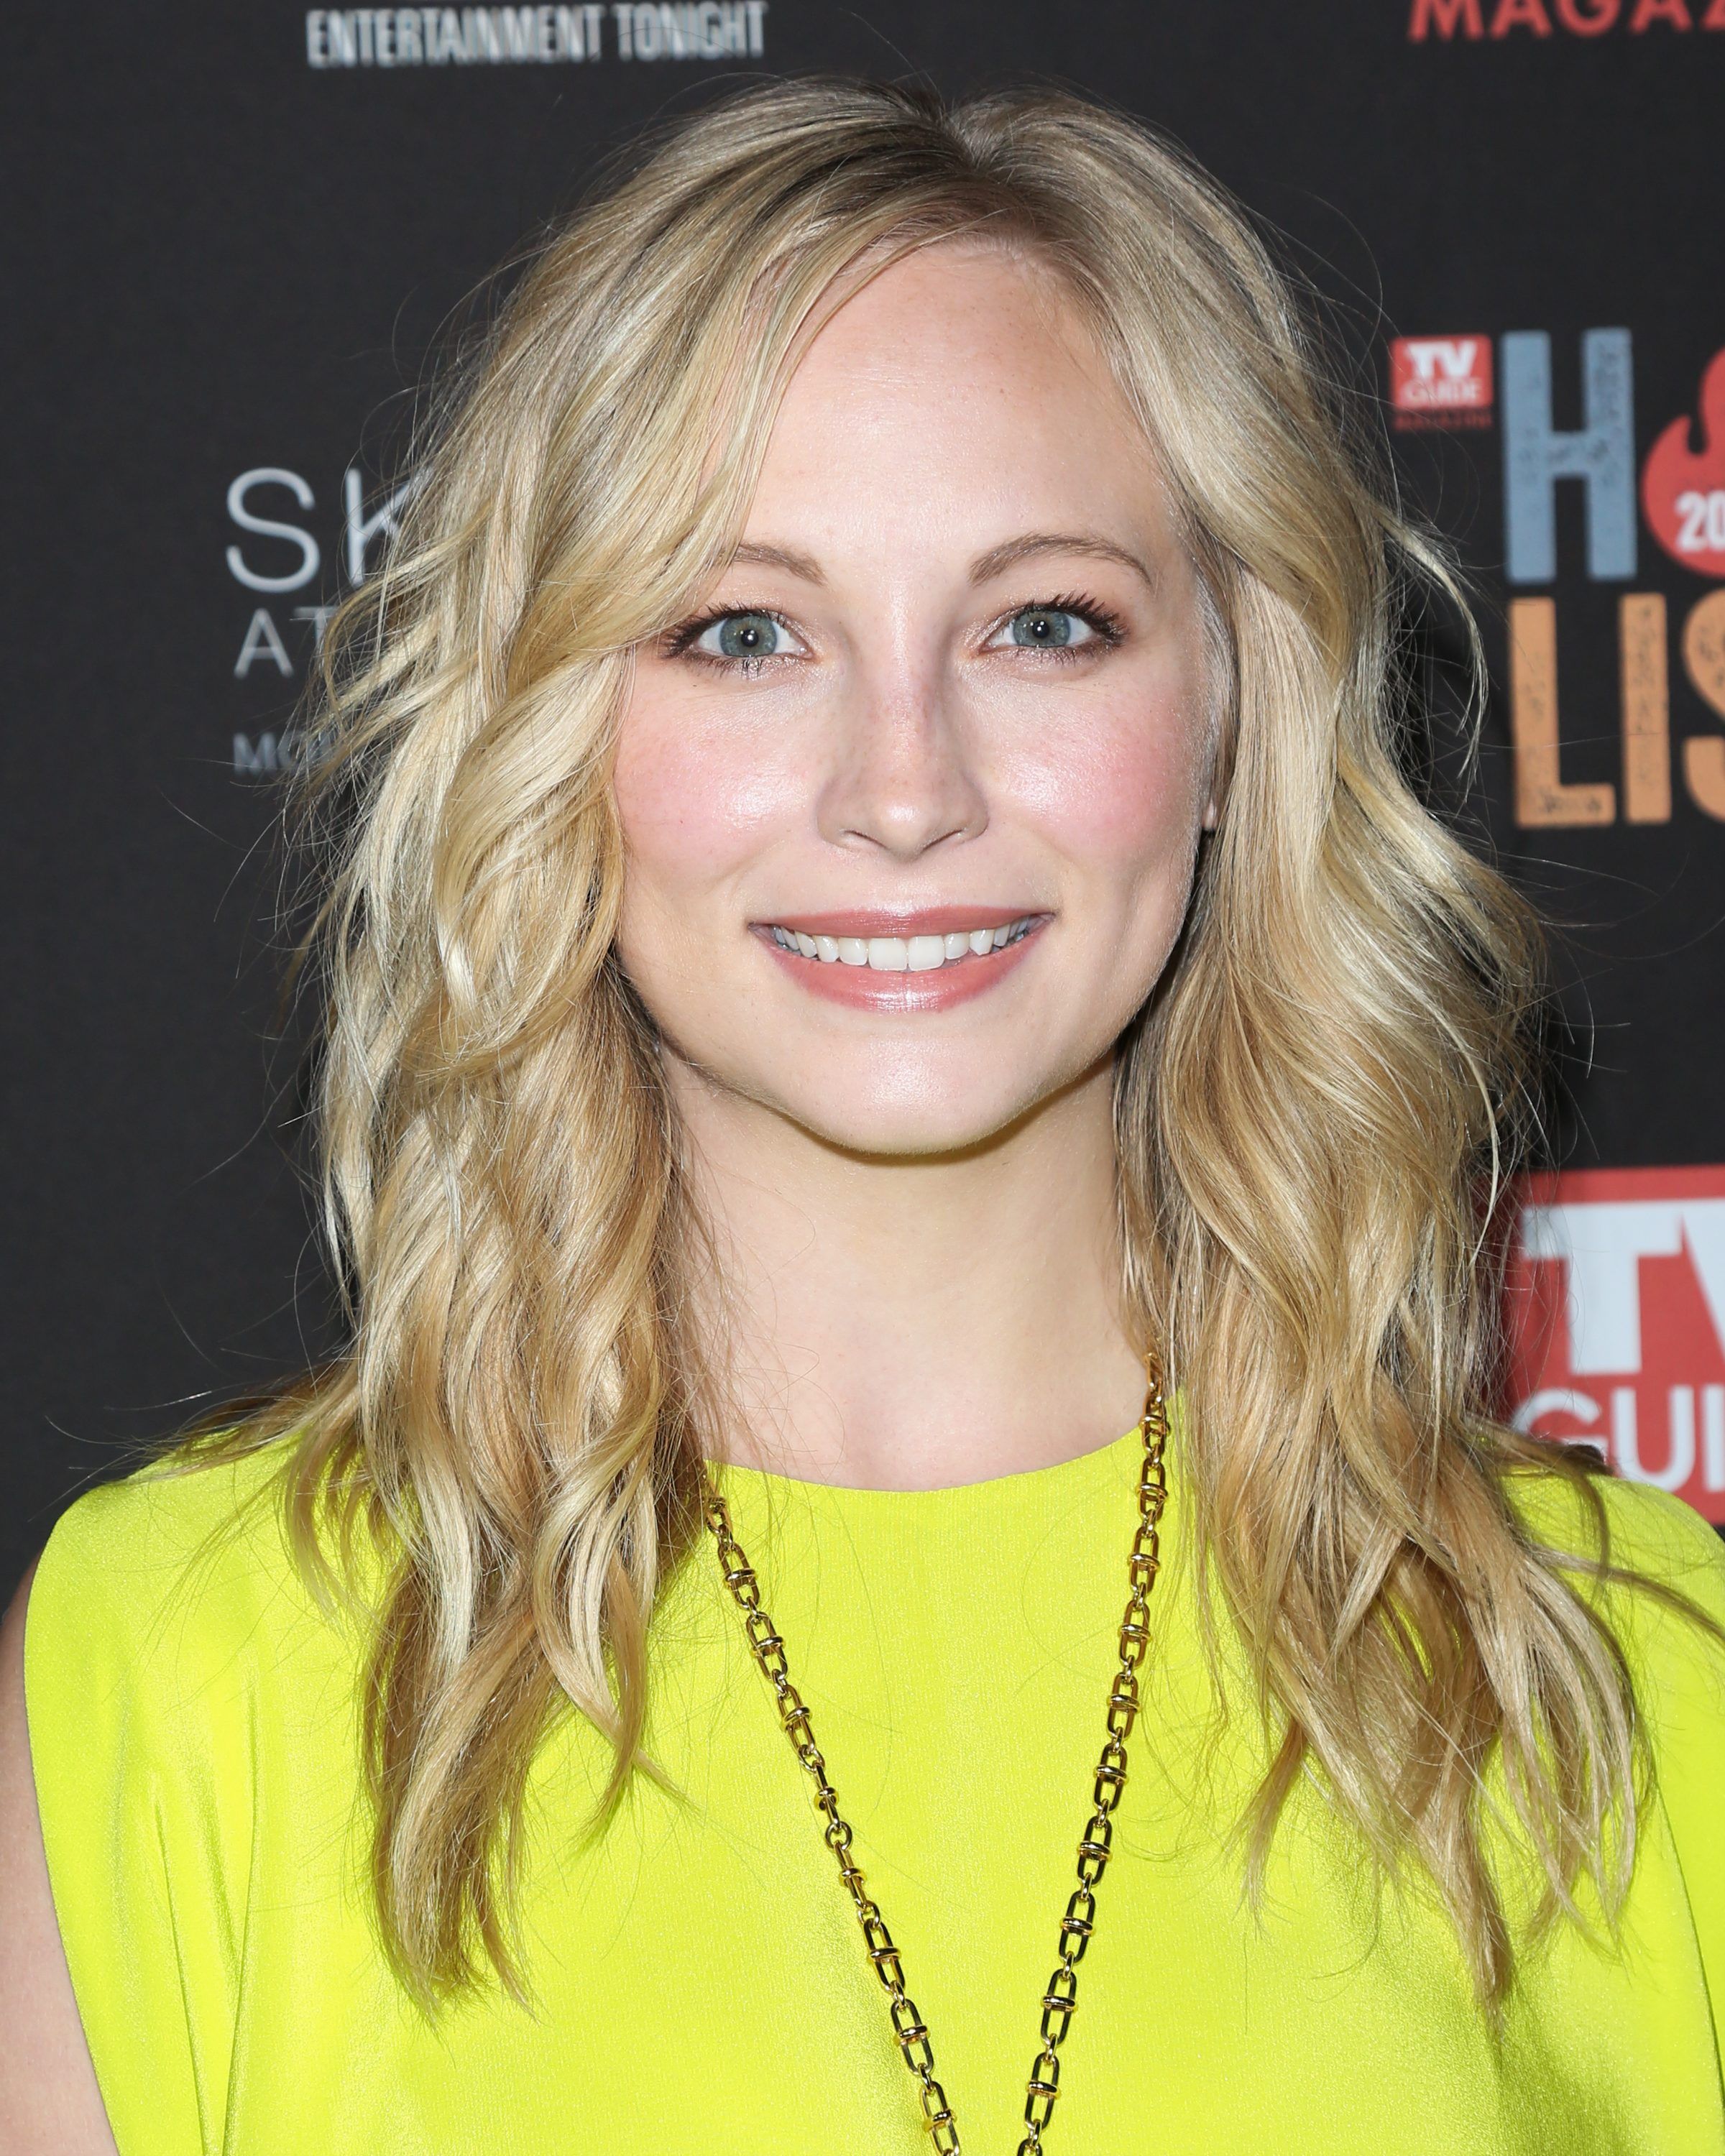 May 2015 Candice Accola HD Background for PC ⇔ Full HDQ